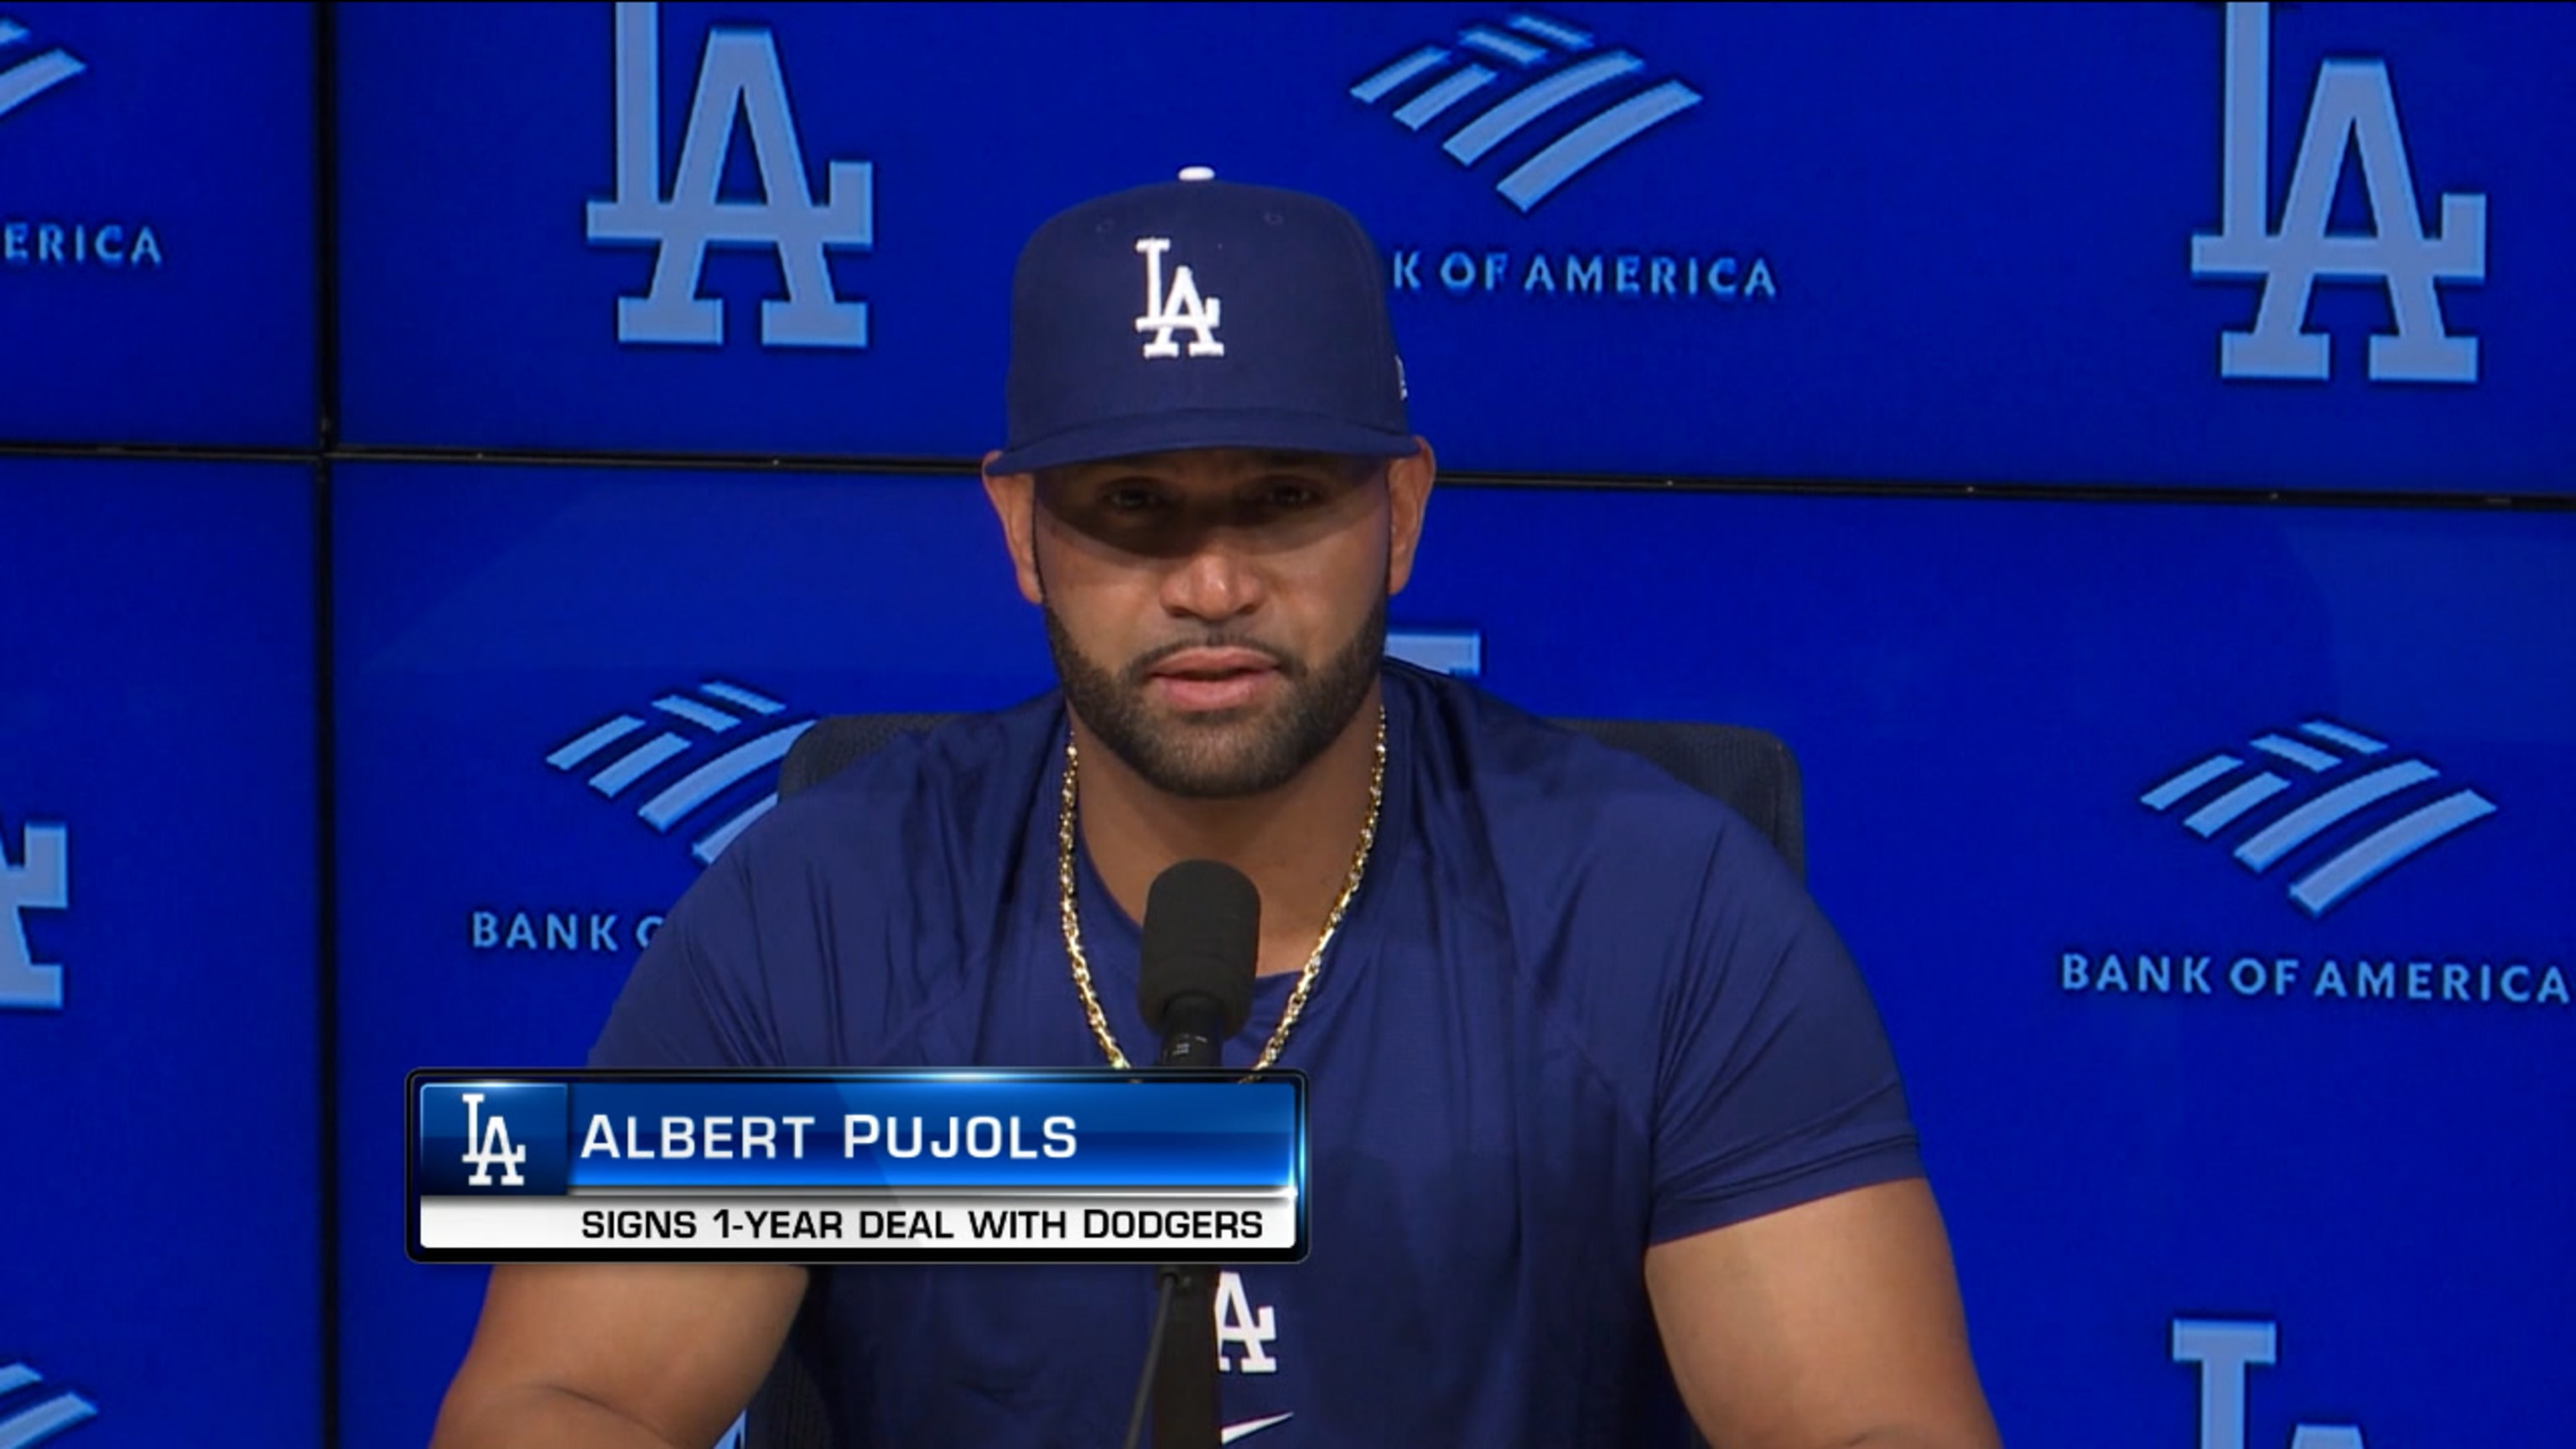 Albert Pujols moves to Dodgers, disputes Angels' everyday claims